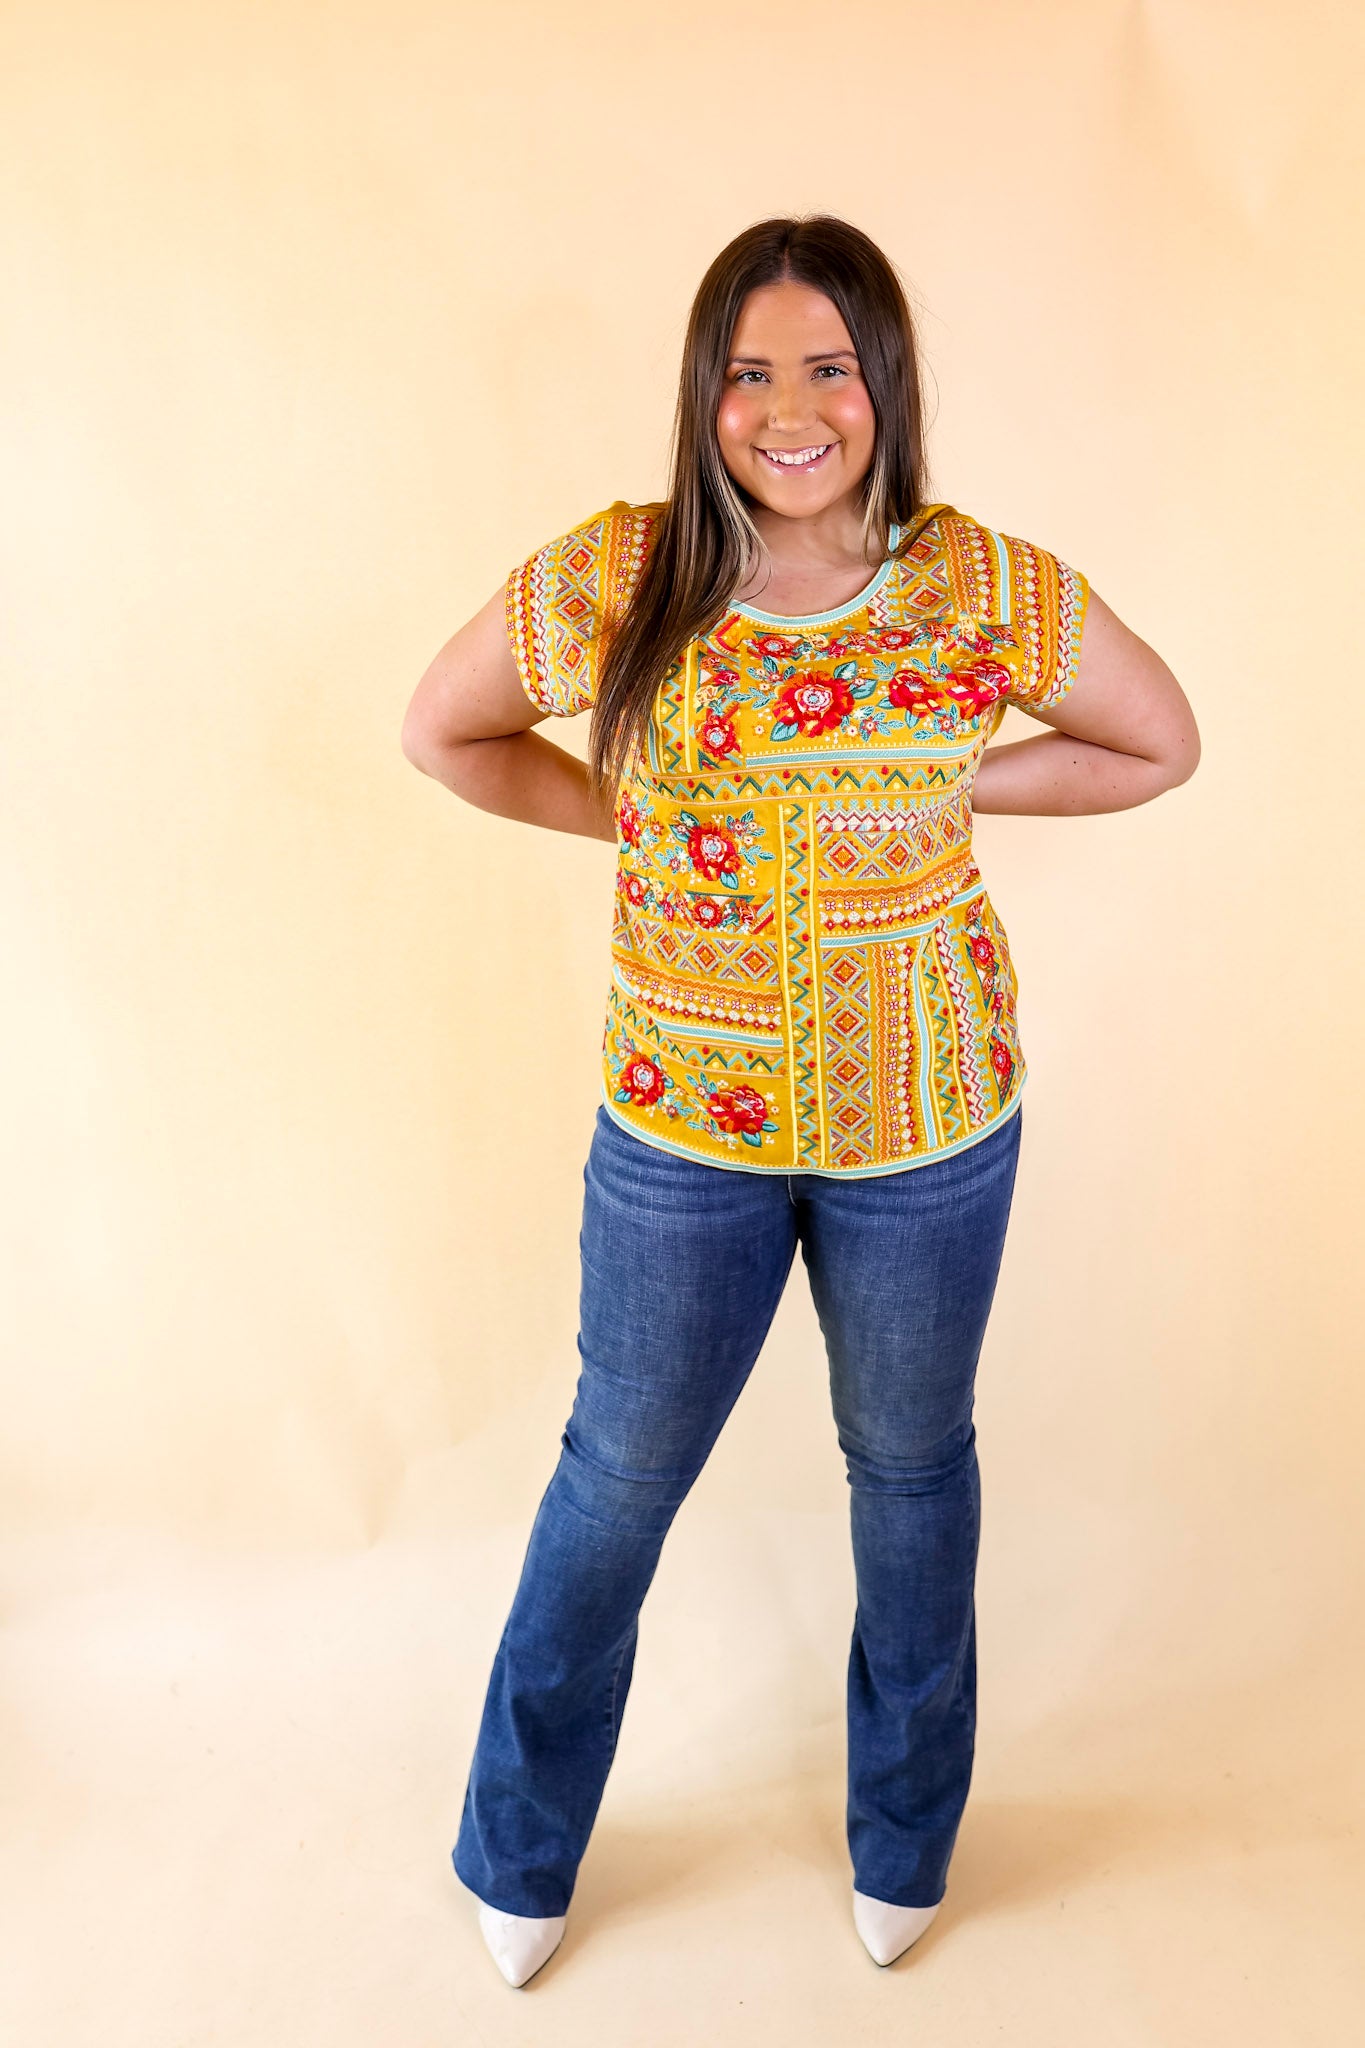 Sonoma Valley Bright Embroidered Short Sleeve Top in Marigold Yellow - Giddy Up Glamour Boutique